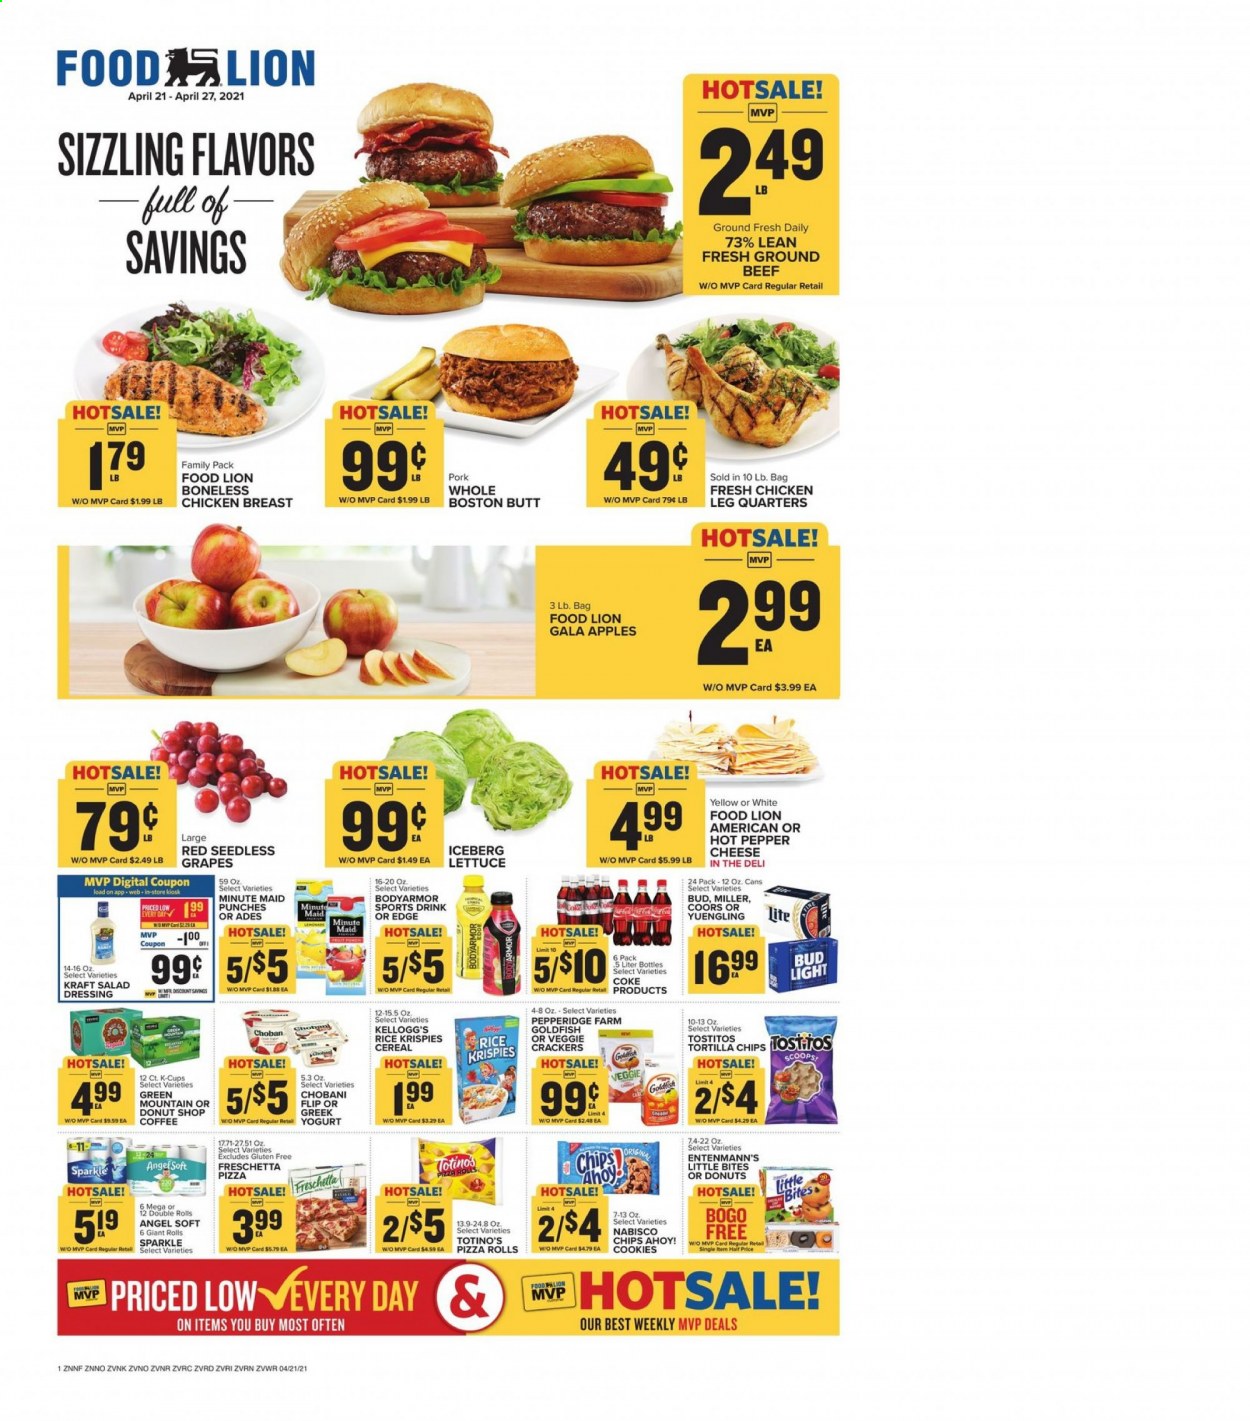 thumbnail - Food Lion Flyer - 04/21/2021 - 04/27/2021 - Sales products - Coors, Yuengling, seedless grapes, pizza rolls, Entenmann's, lettuce, apples, Gala, grapes, pizza, Kraft®, Chobani, cookies, crackers, Kellogg's, Chips Ahoy!, Little Bites, tortilla chips, chips, Goldfish, Tostitos, cereals, Rice Krispies, salad dressing, dressing, fruit punch, coffee, coffee capsules, K-Cups, Green Mountain, beer, Bud Light, Miller, chicken breasts, chicken legs, beef meat, ground beef. Page 1.